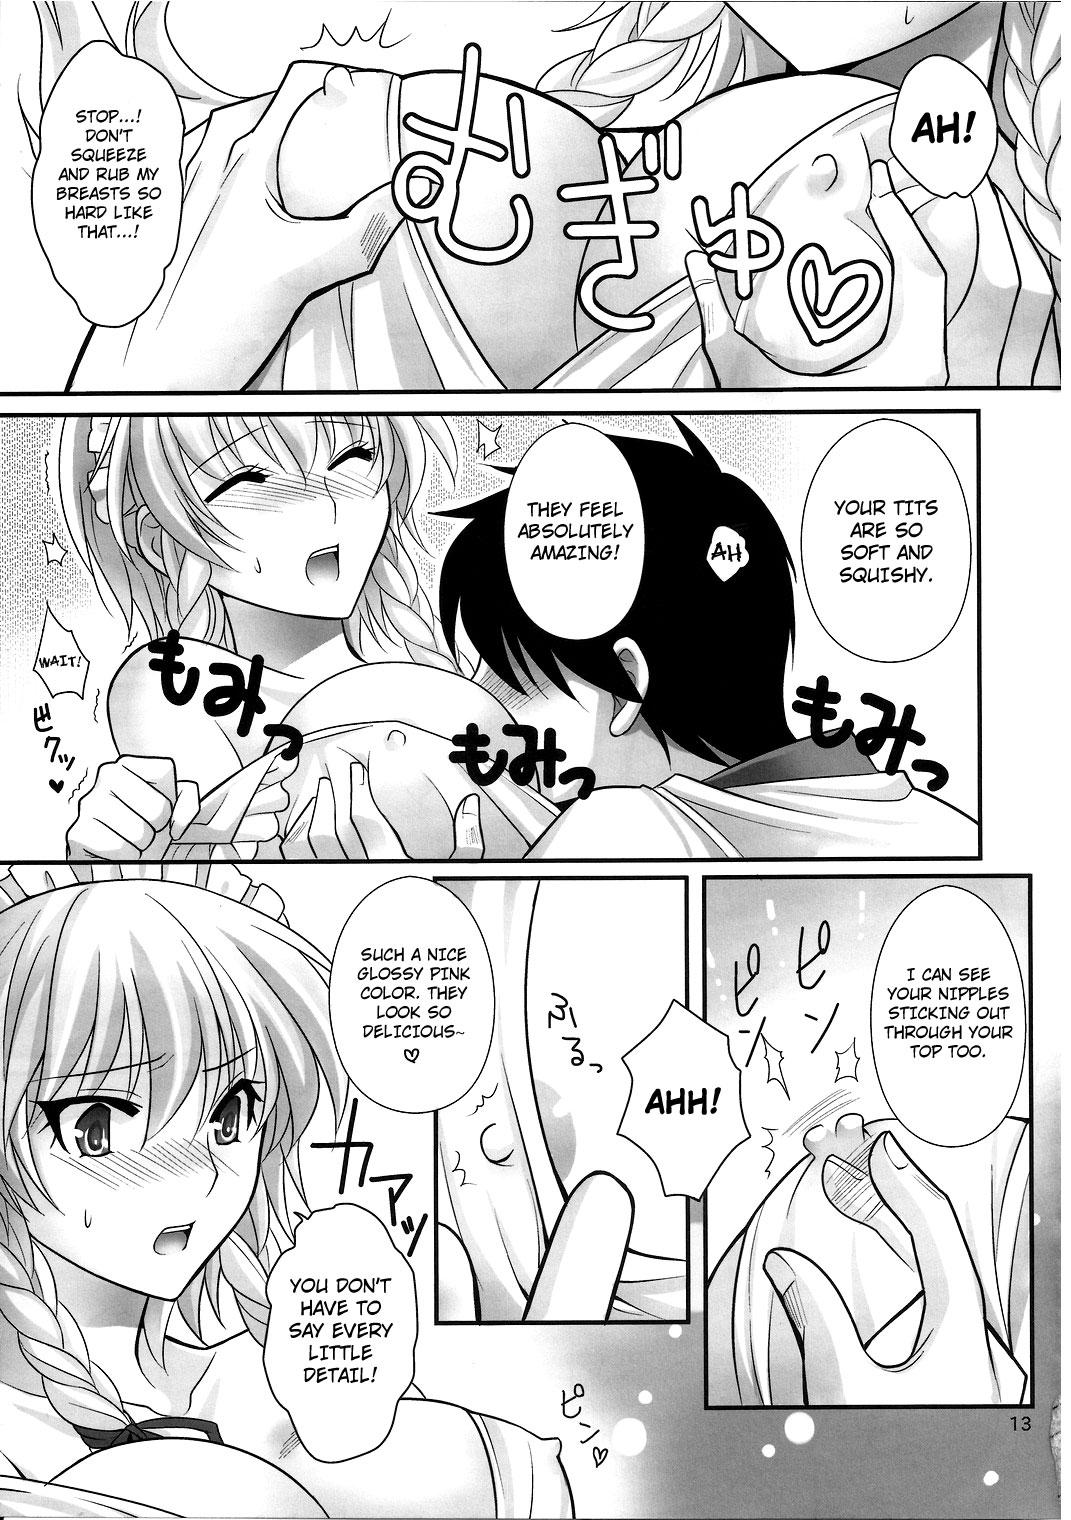 Screaming EAT ME - Touhou project Actress - Page 12